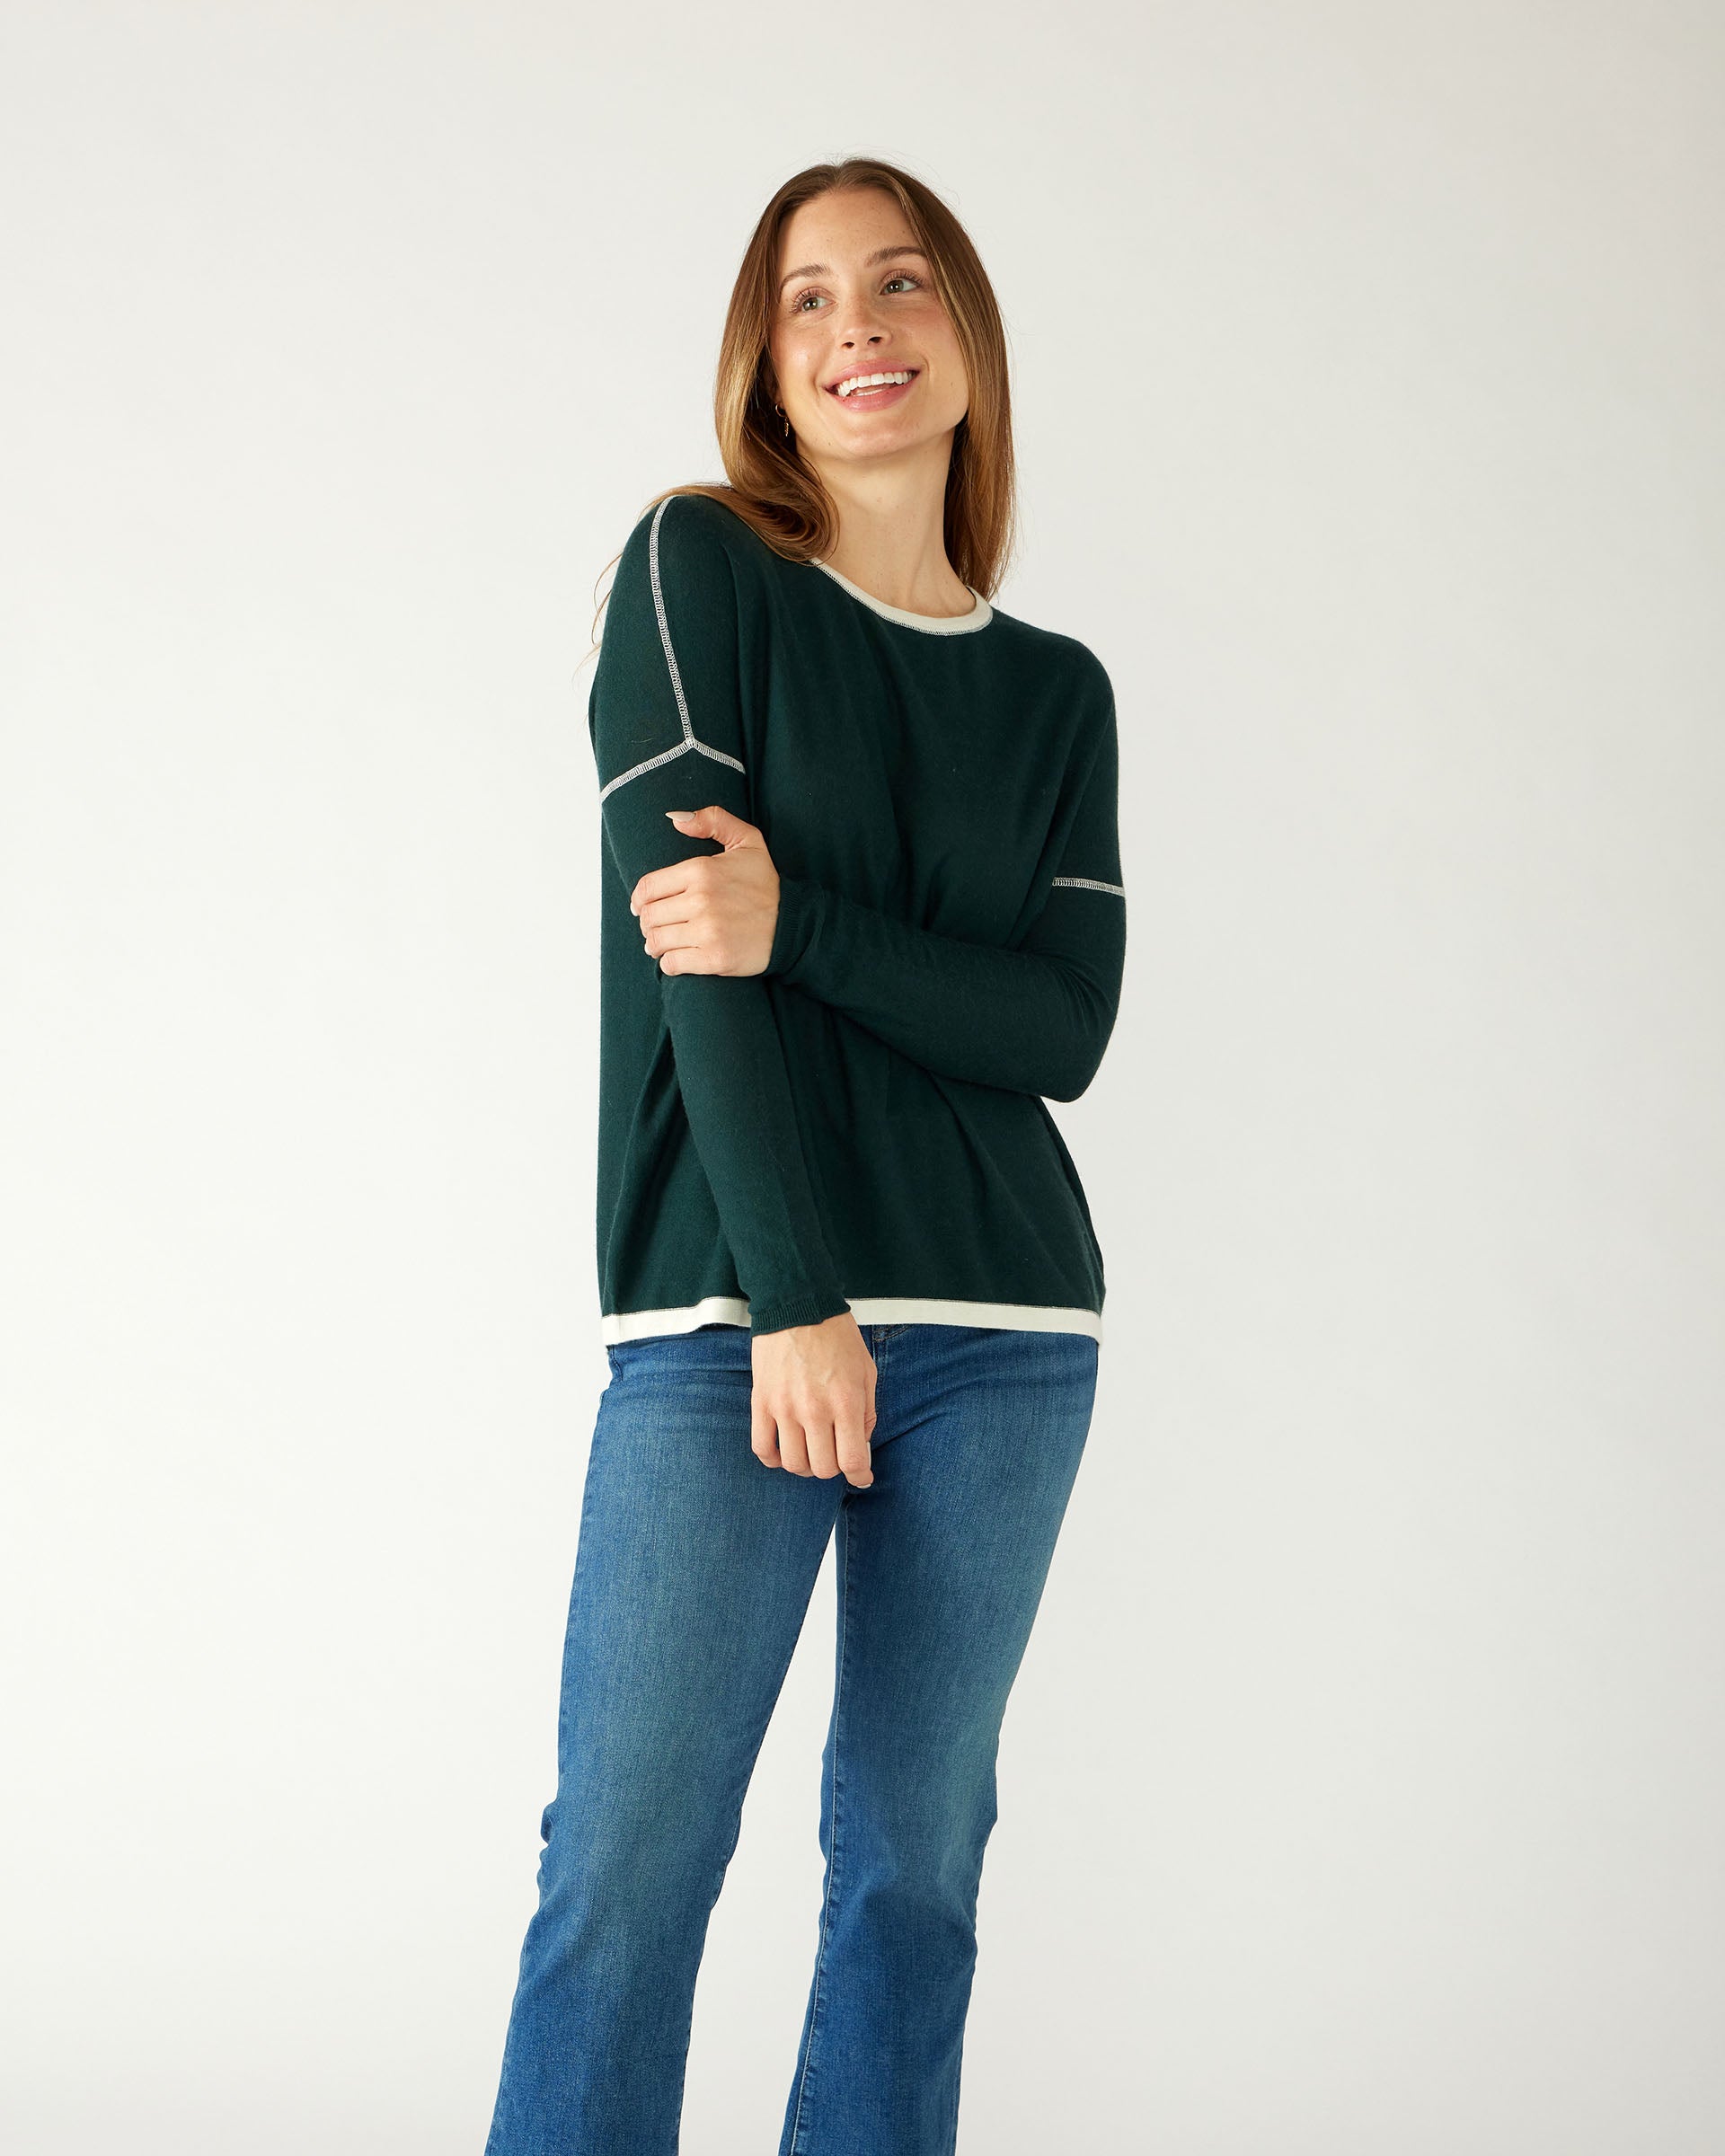 woman holding arm wearing mersea saltwash sweater in forest green